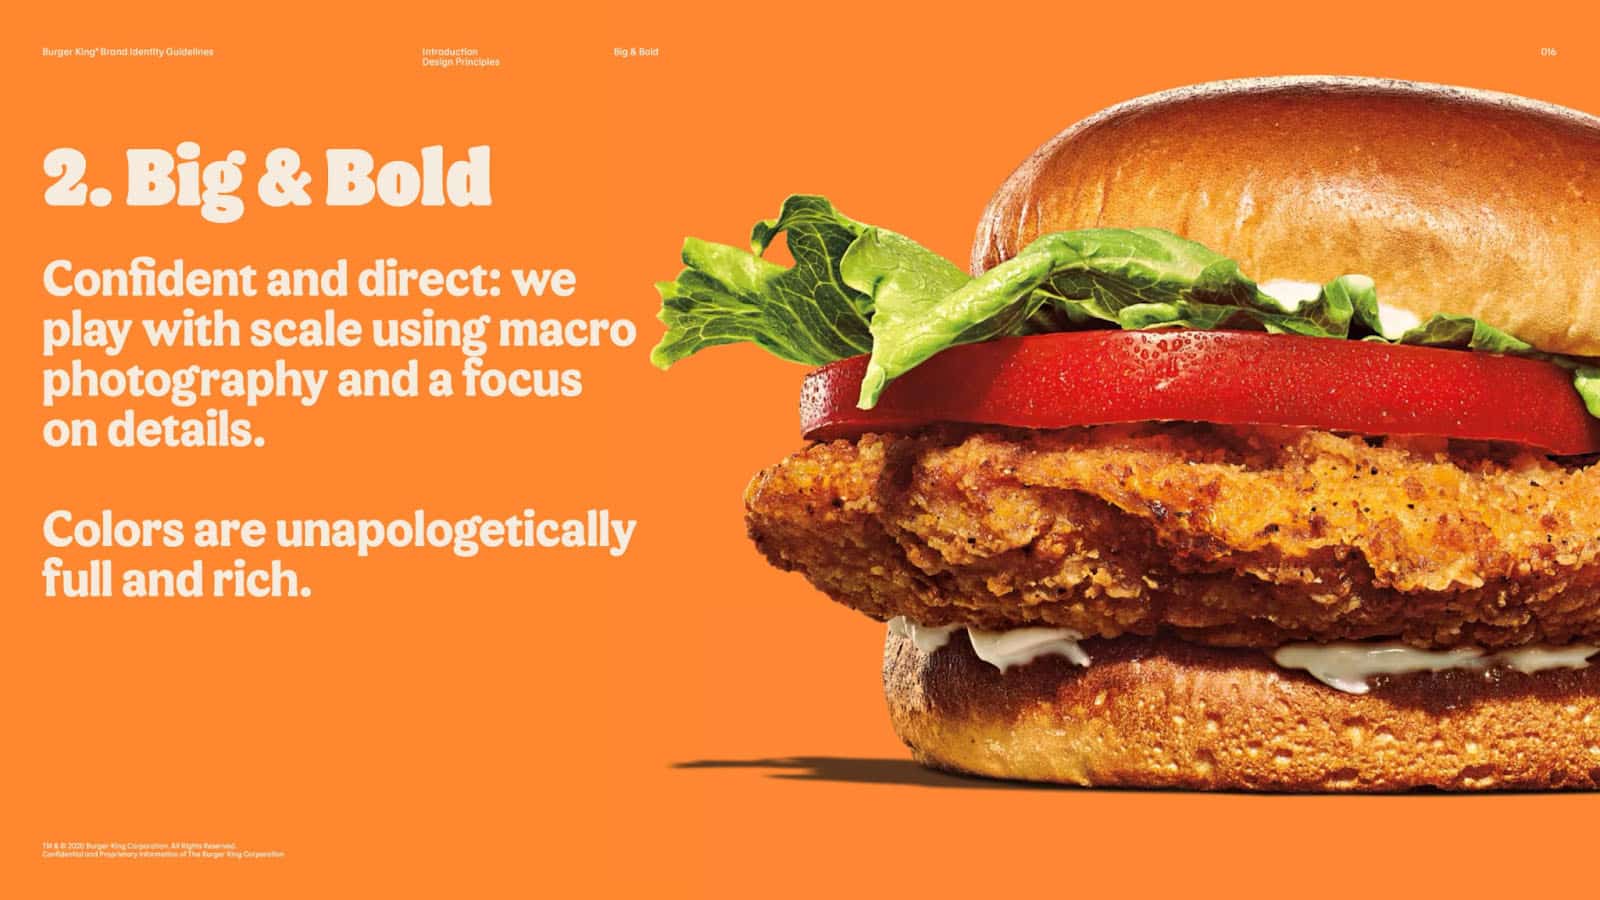 Burger King's Brand Guidelines include bold graphics and colors.